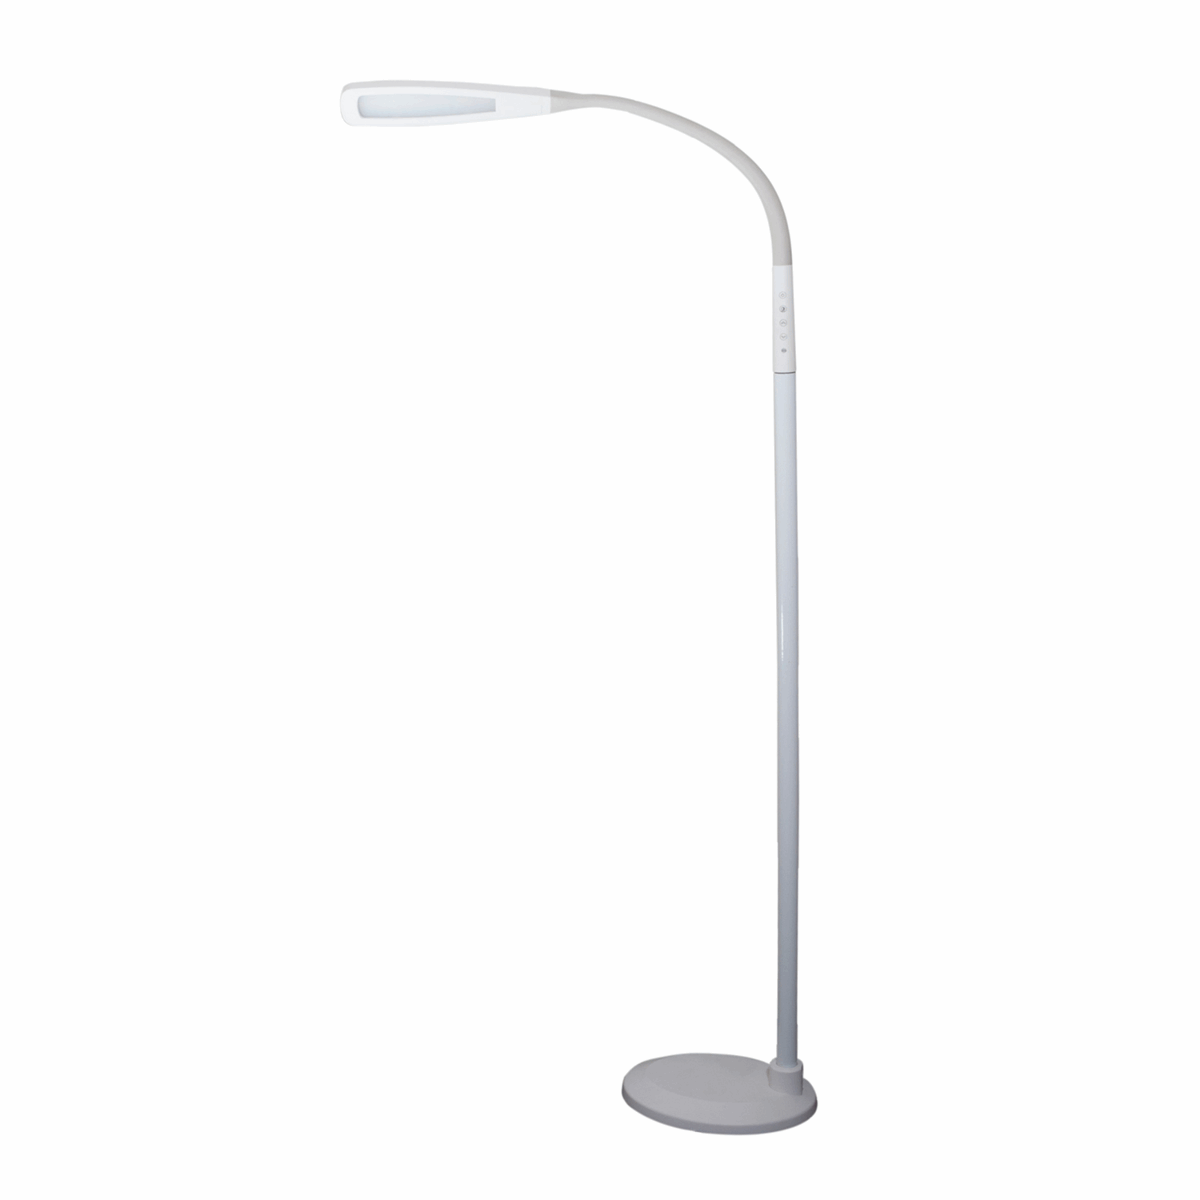 PURElite Touch LED Floor Lamp - 4 colour settings from Warm to Cool